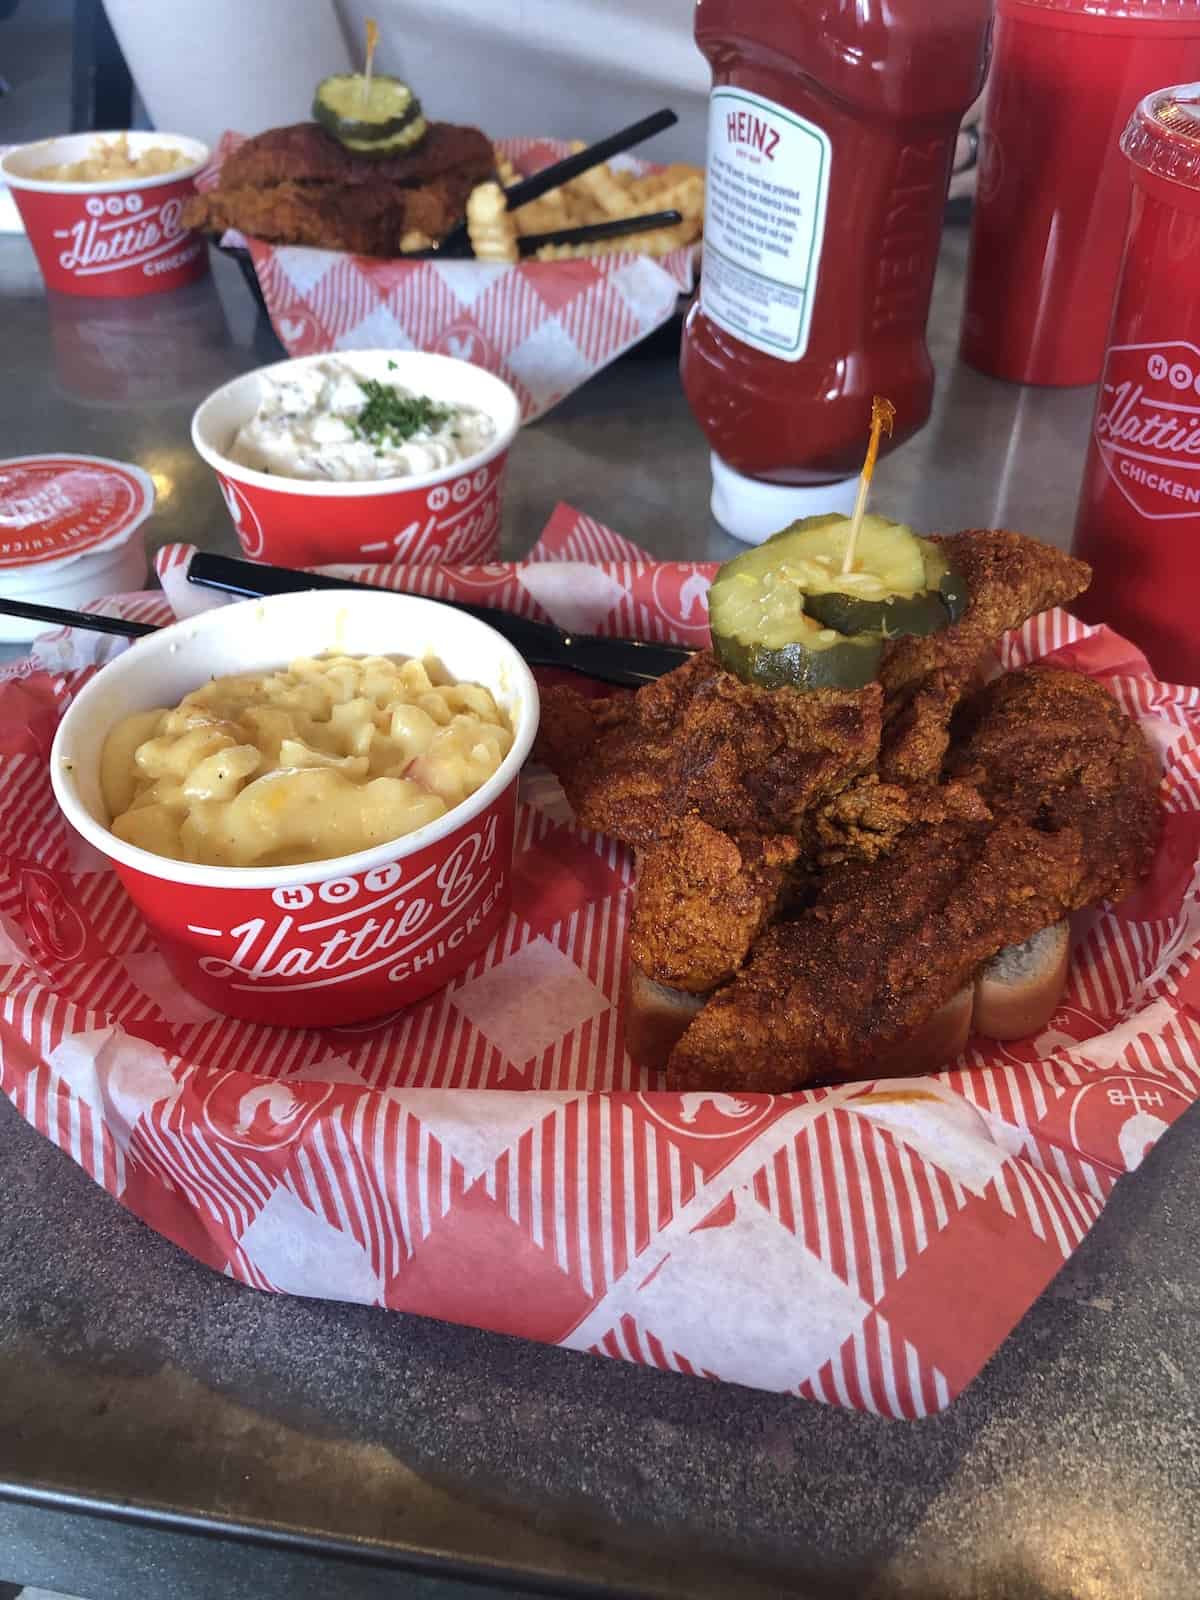 hattie b's hot chicken with potato salad and mac and cheese